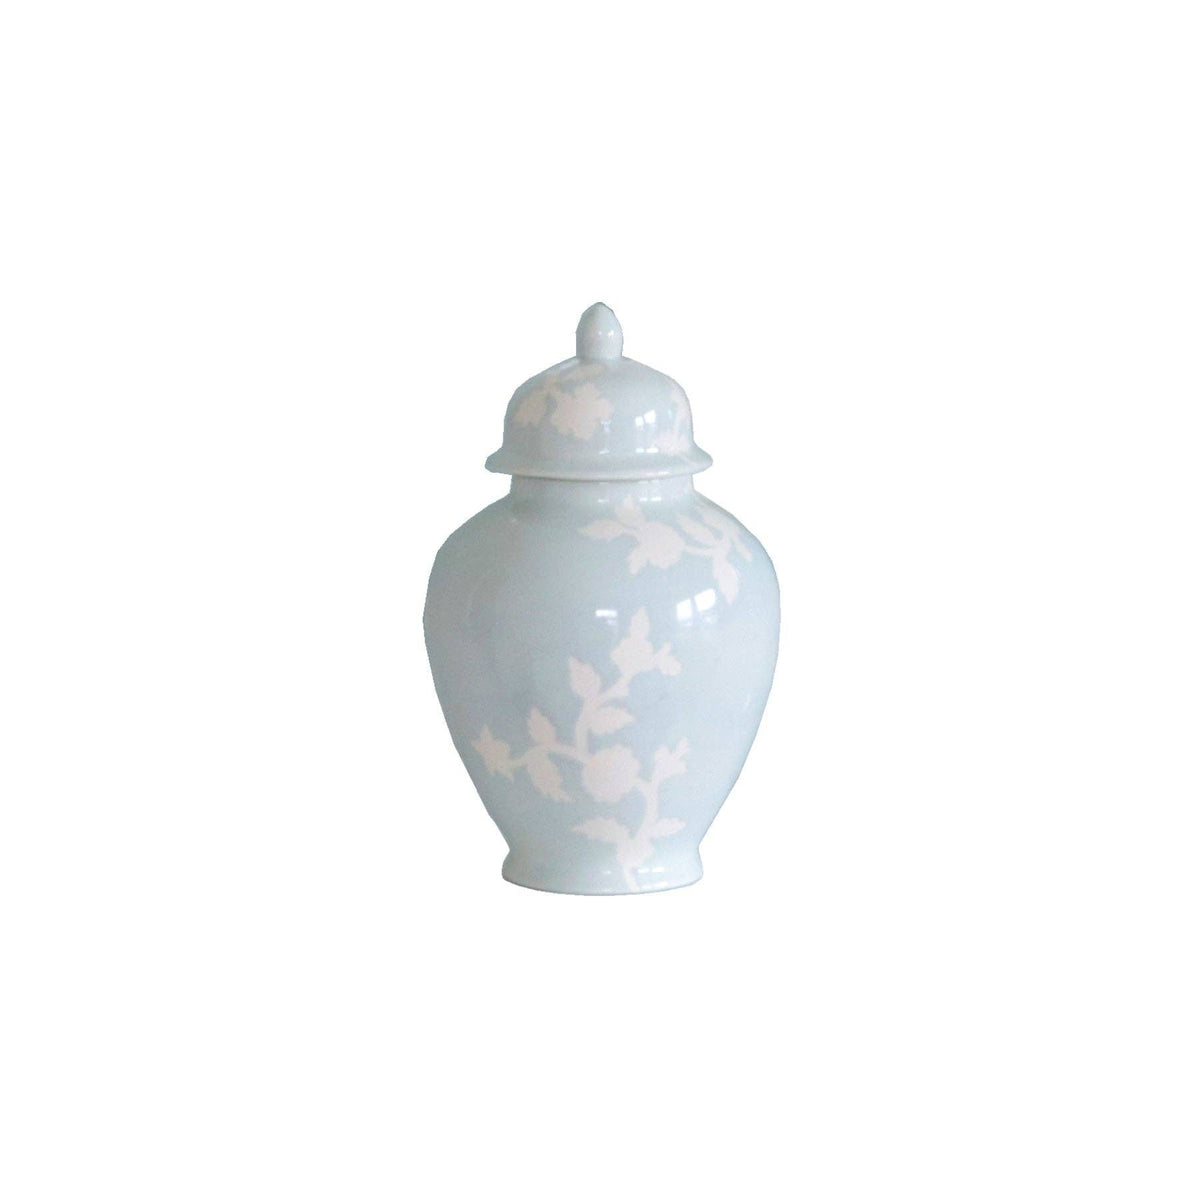 Chinoiserie Dreams Ginger Jar in Hydrangea Light Blue - Small - The Preppy Bunny